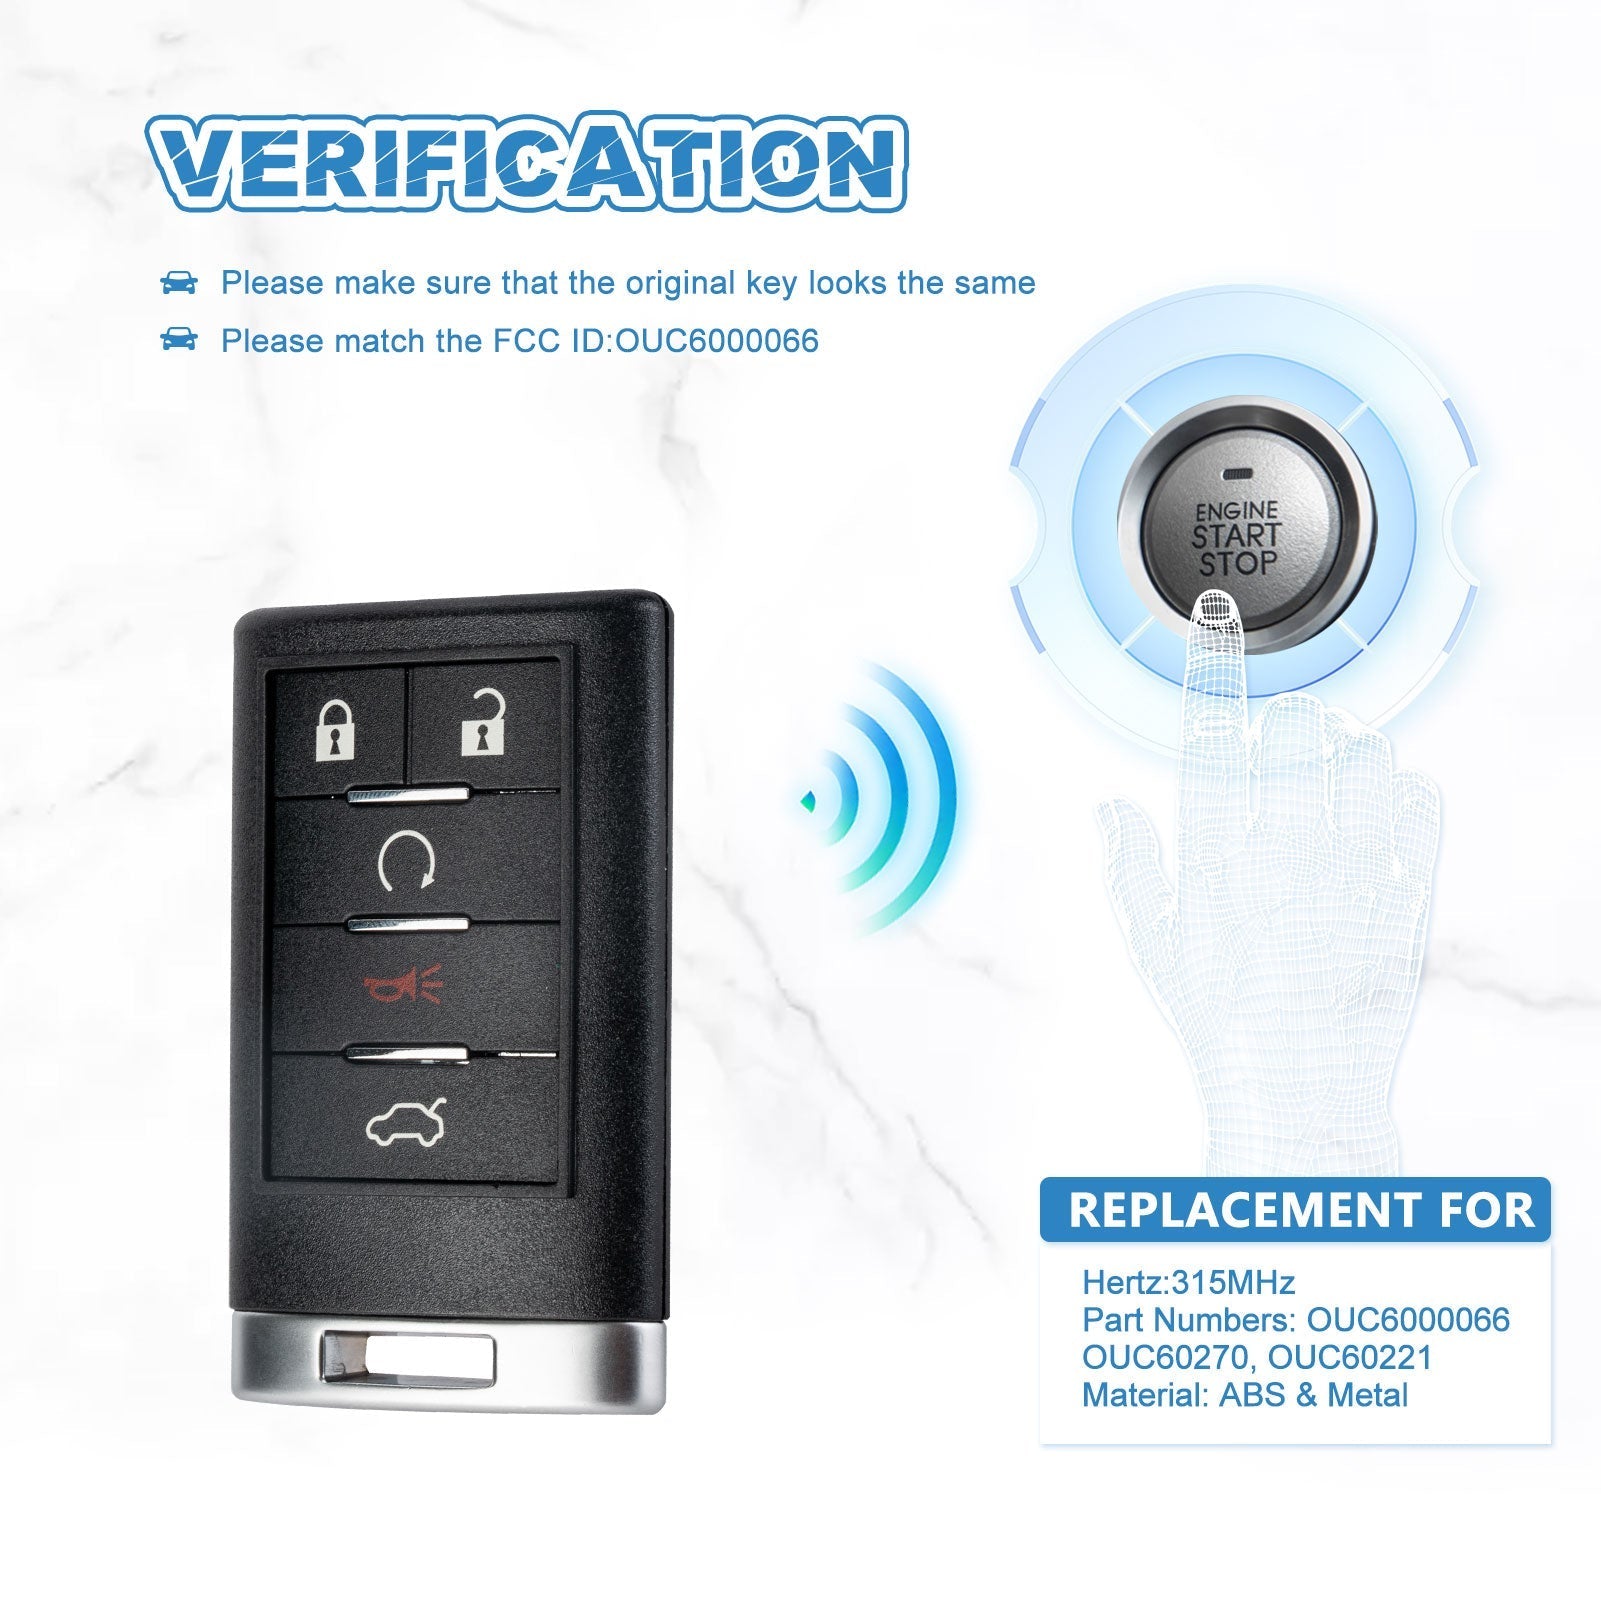 Car Key Fob 315MHz Replacement for 2008 2009 Cadillac CTS SRX STS DTS Keyless Entry  KR-G5RA-10